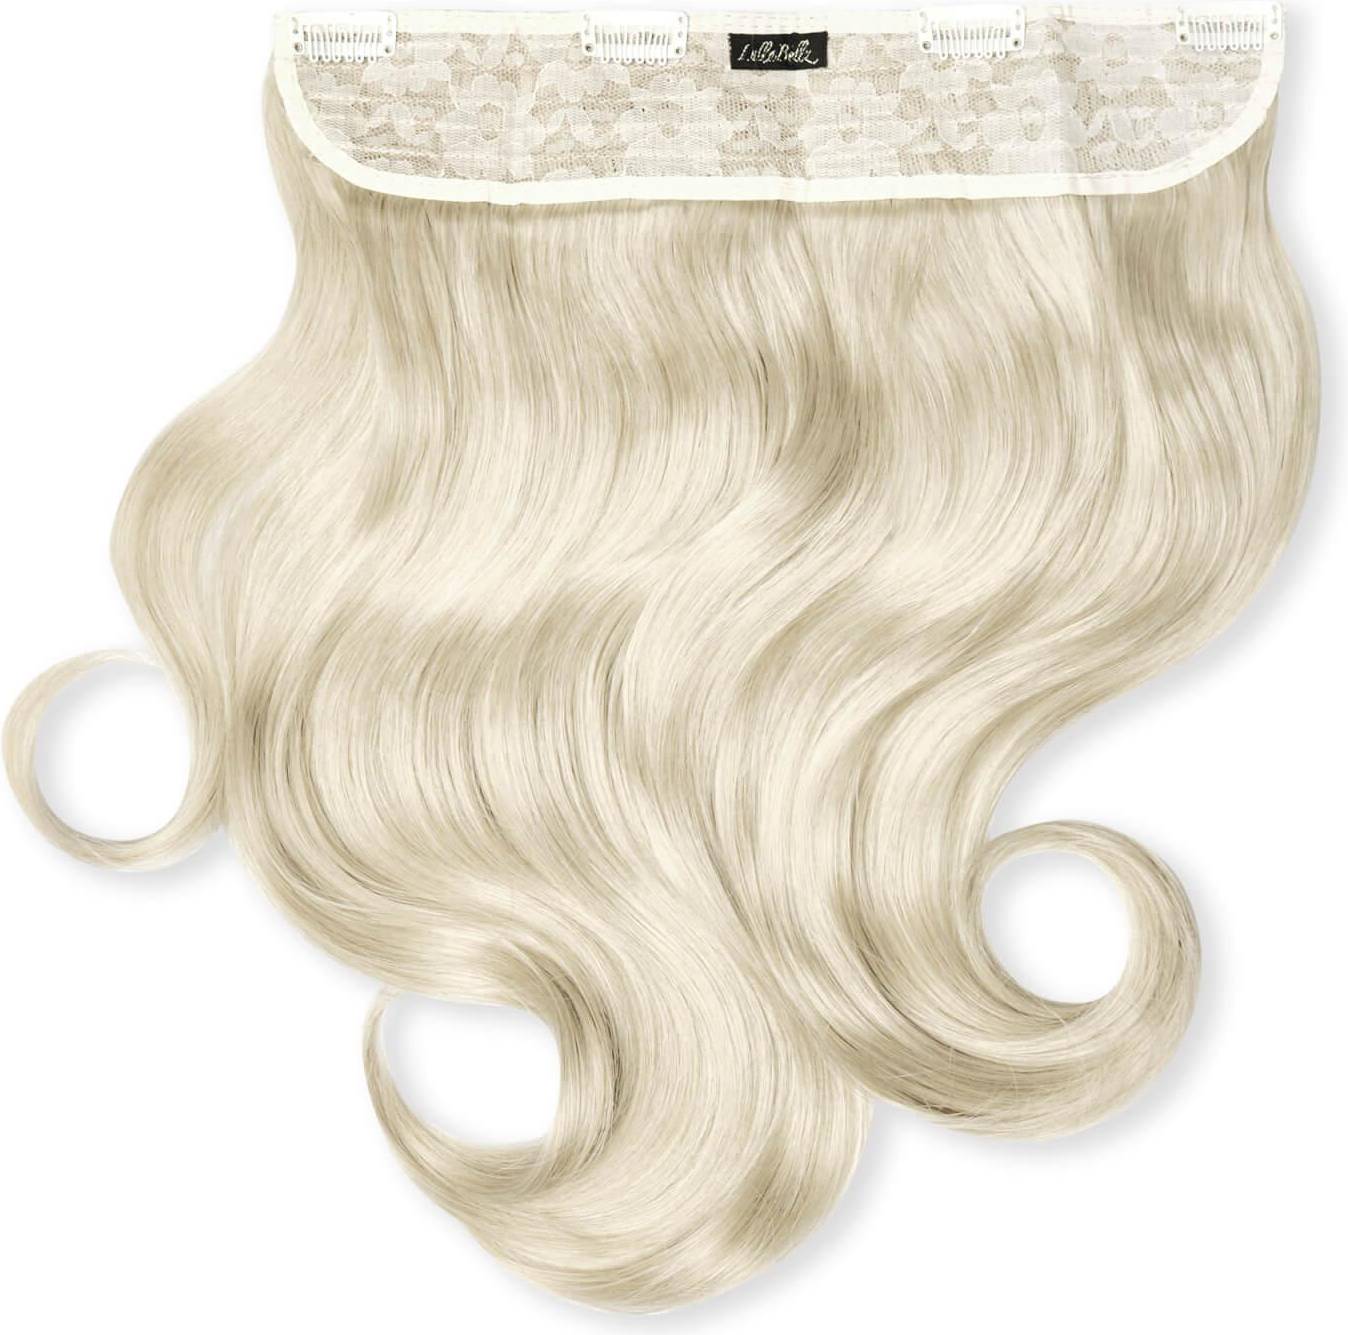 Lullabellz Thick Curly Clip In Hair Extensions 16 inch Bleach Blonde ...